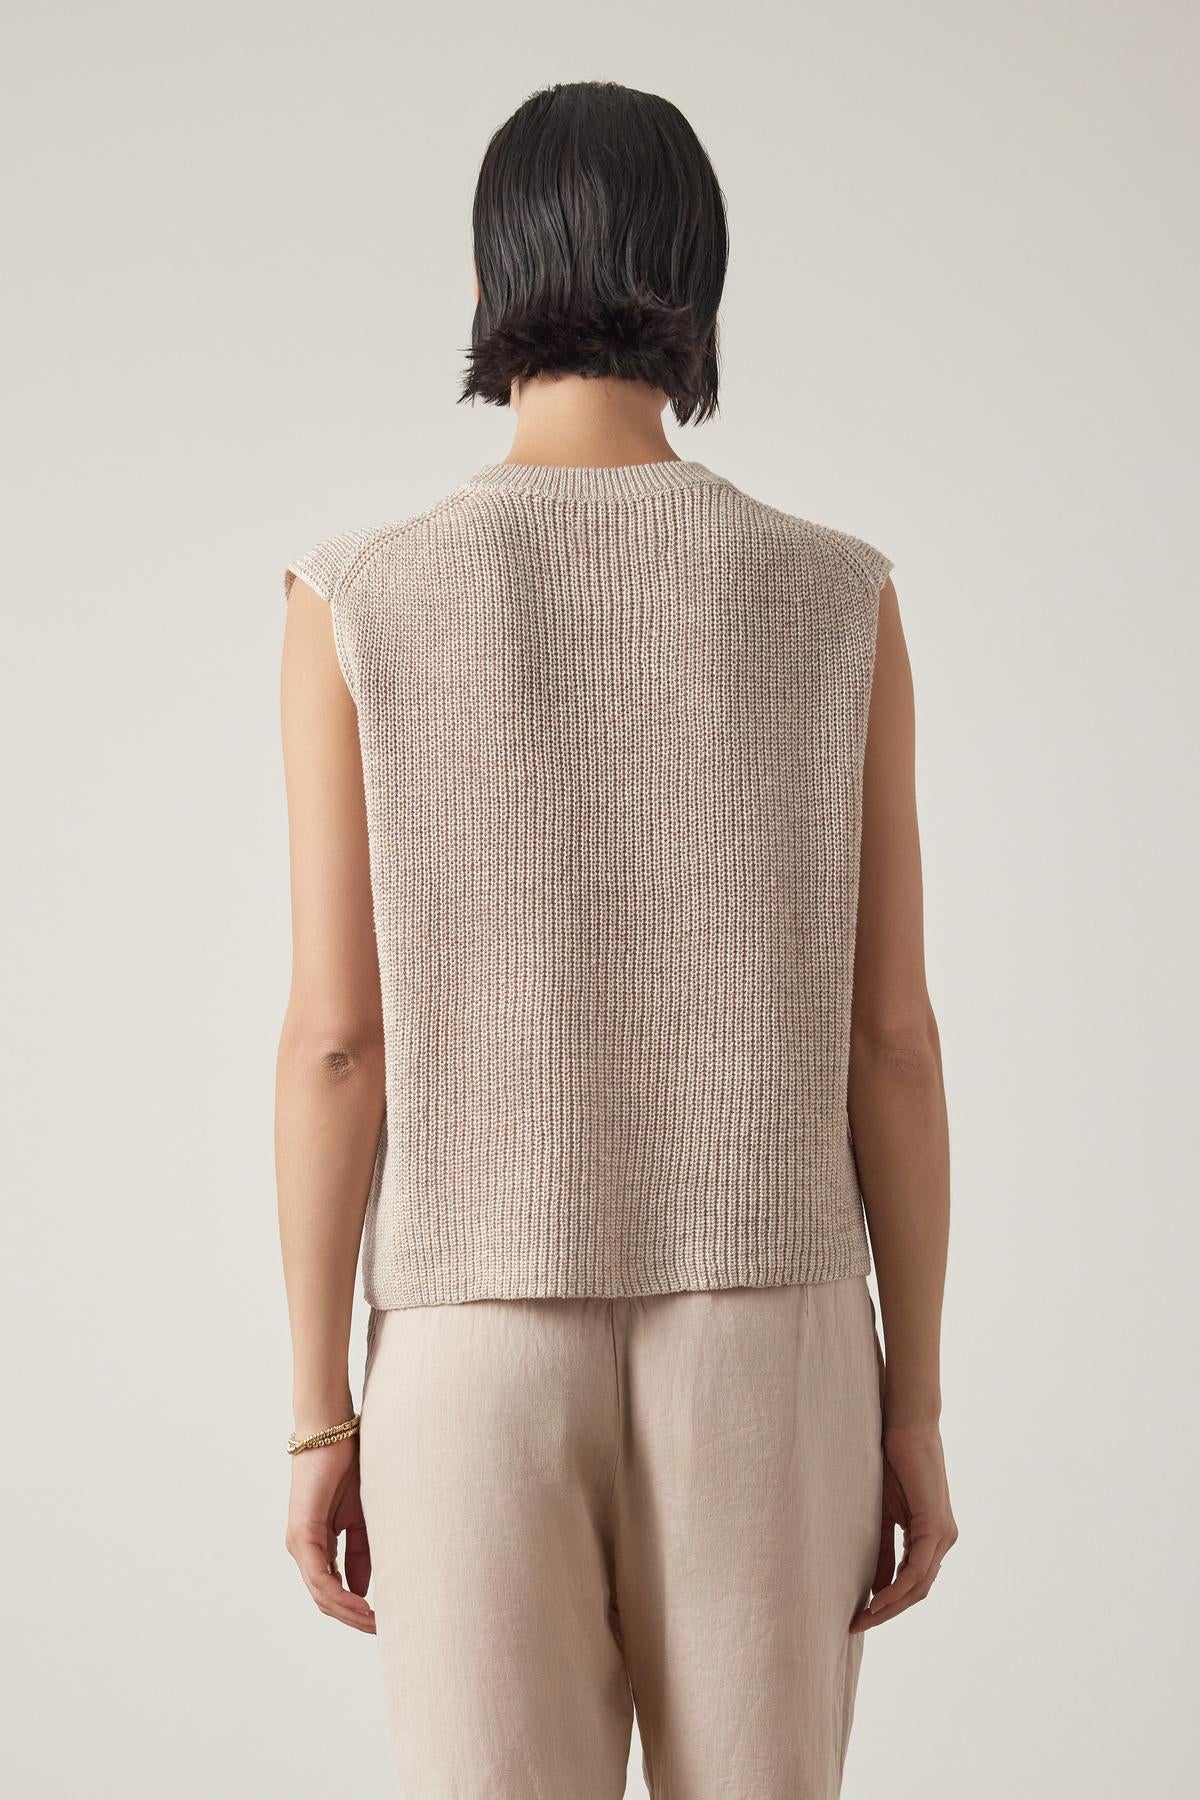 Rear view of a woman wearing a beige GARDENA LINEN SWEATER VEST sleeveless knit top and light linen fabric trousers, standing against a plain background by Velvet by Jenny Graham.-36863284871361